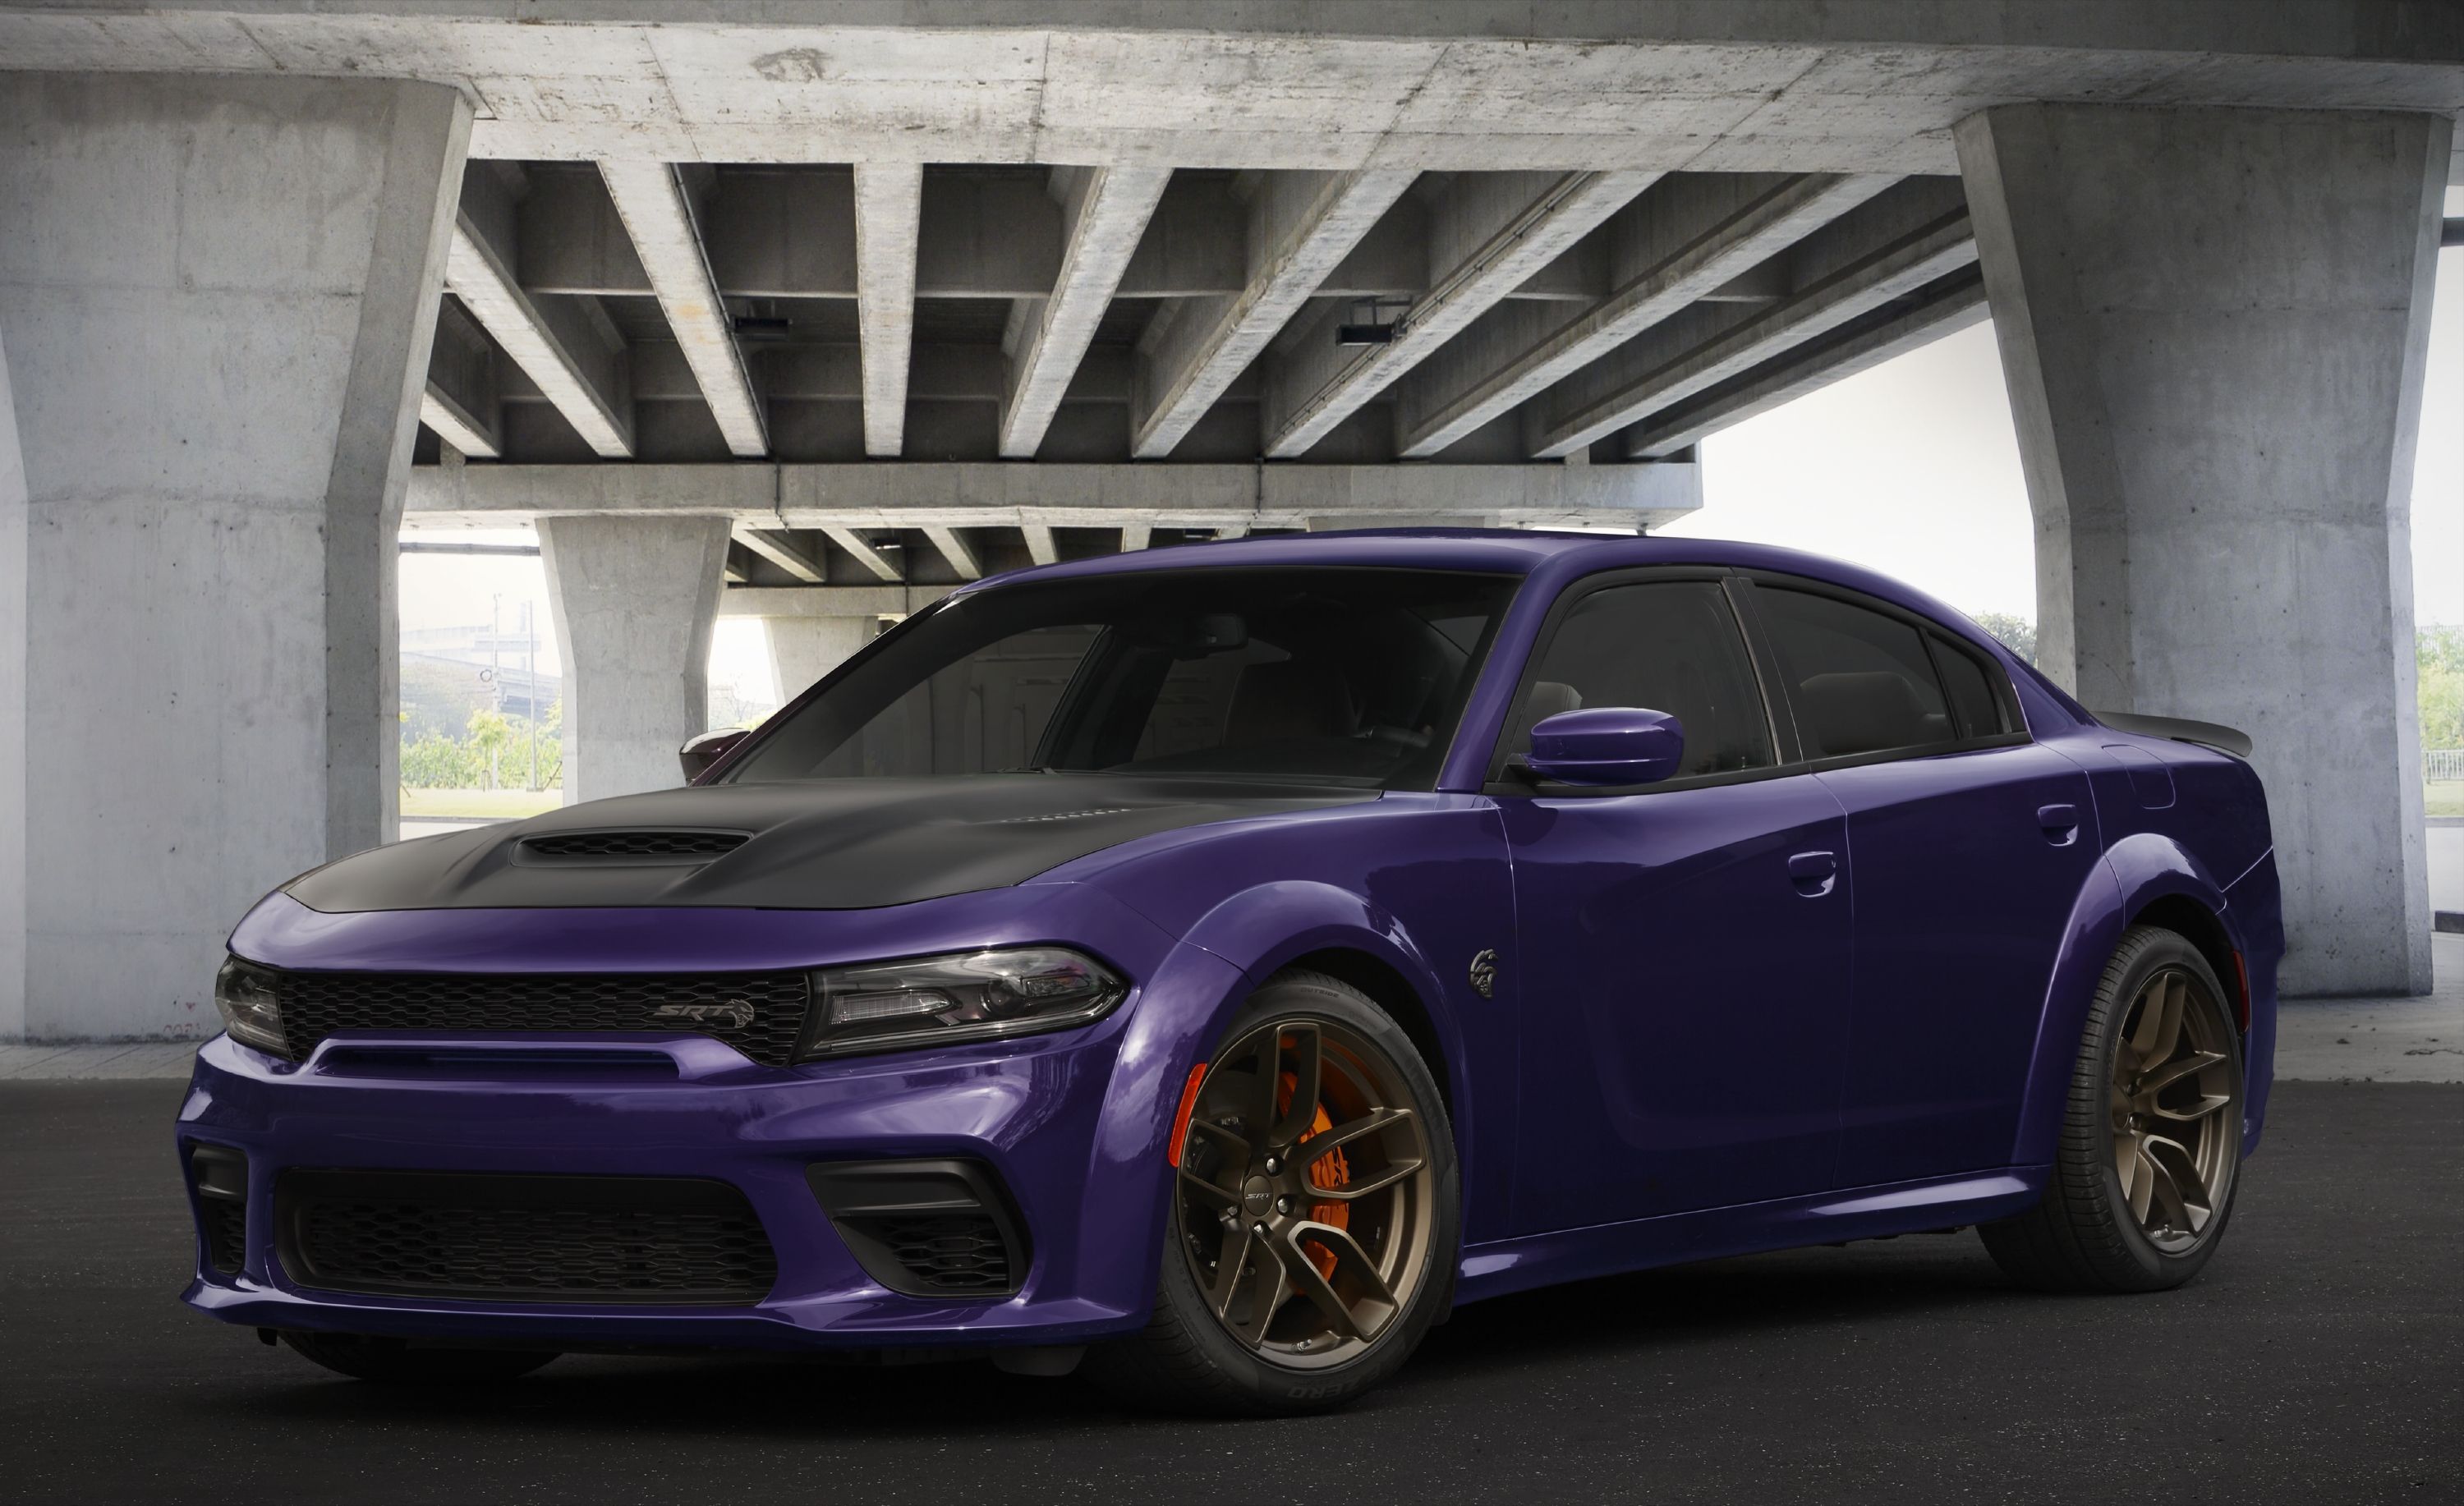 2023 Hellcat Dodge Charger Redesign